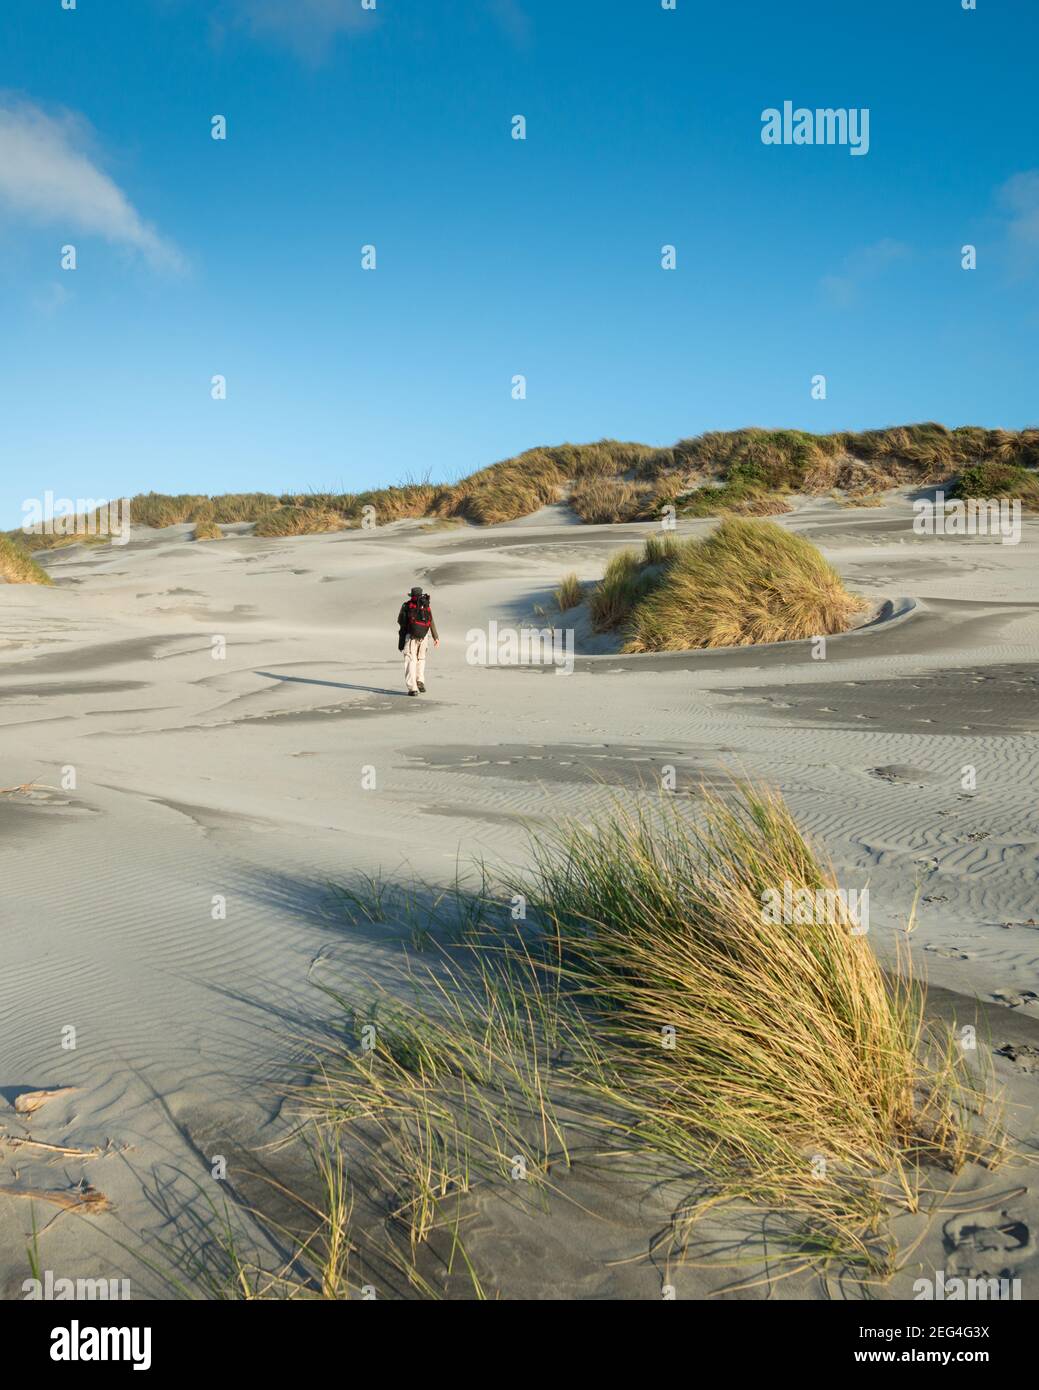 A man walking on the sandy beach with strong wind blowing the tussock grass. Vertical format. Stock Photo